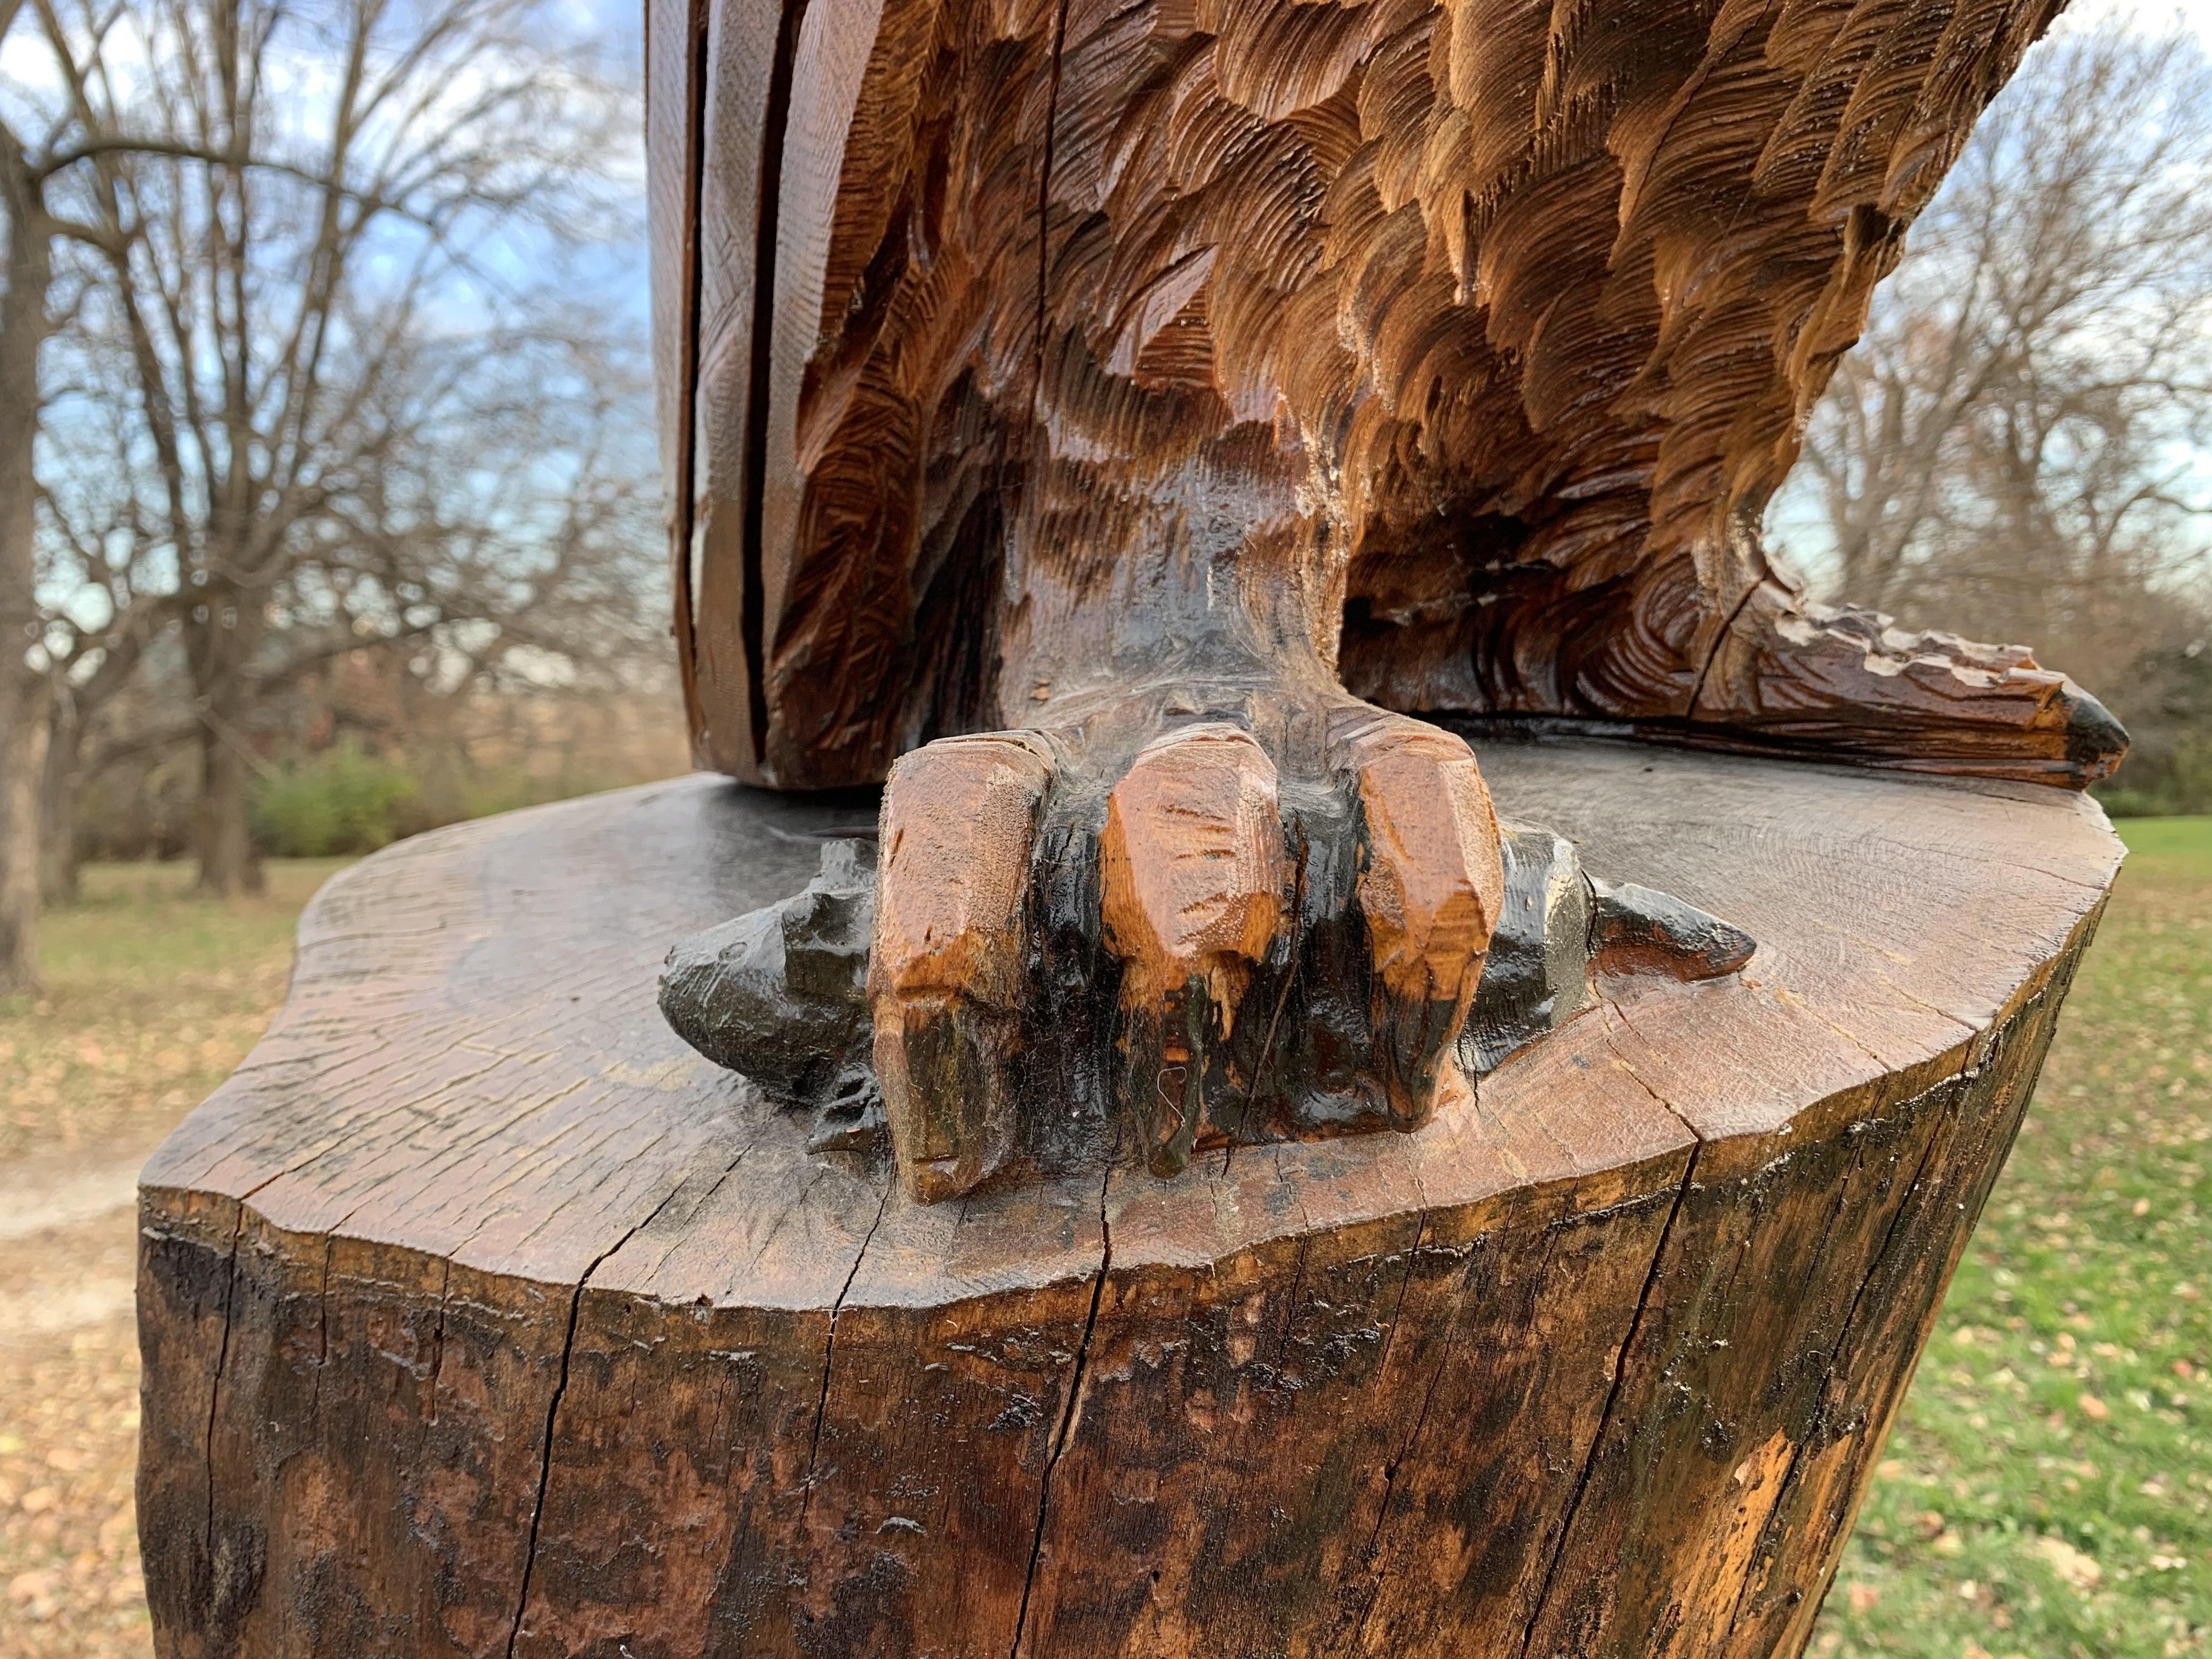 Closeup of the Meadow Vole in the talons of the namesake tree sculpture at Owl Acres.